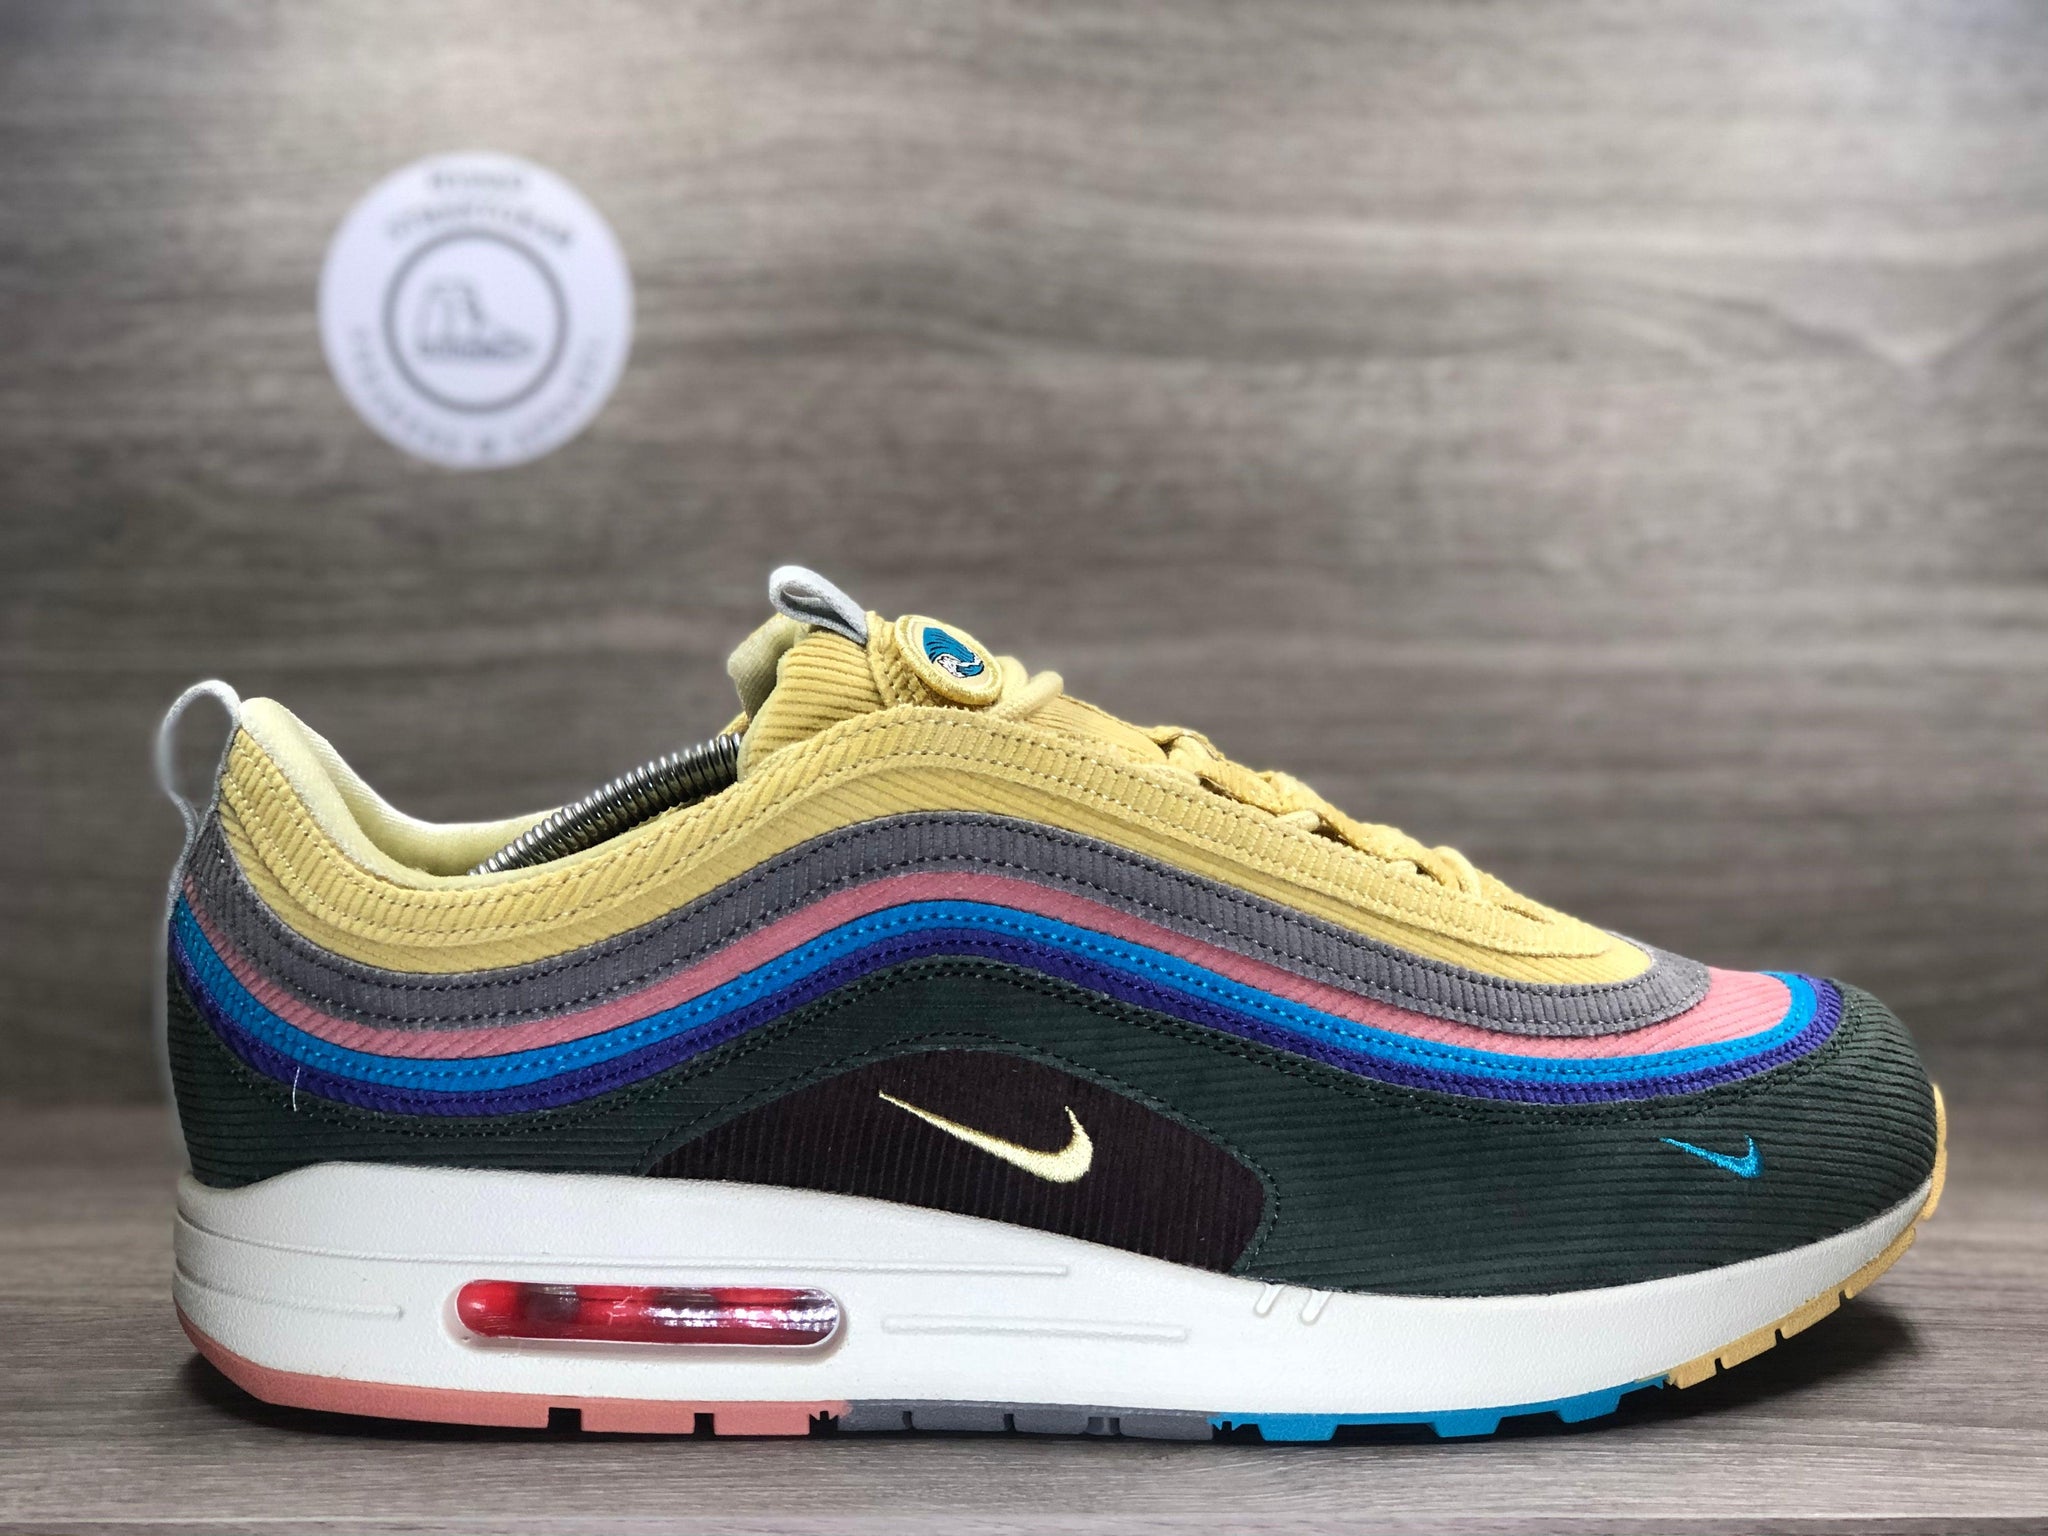 sean wotherspoon 97's